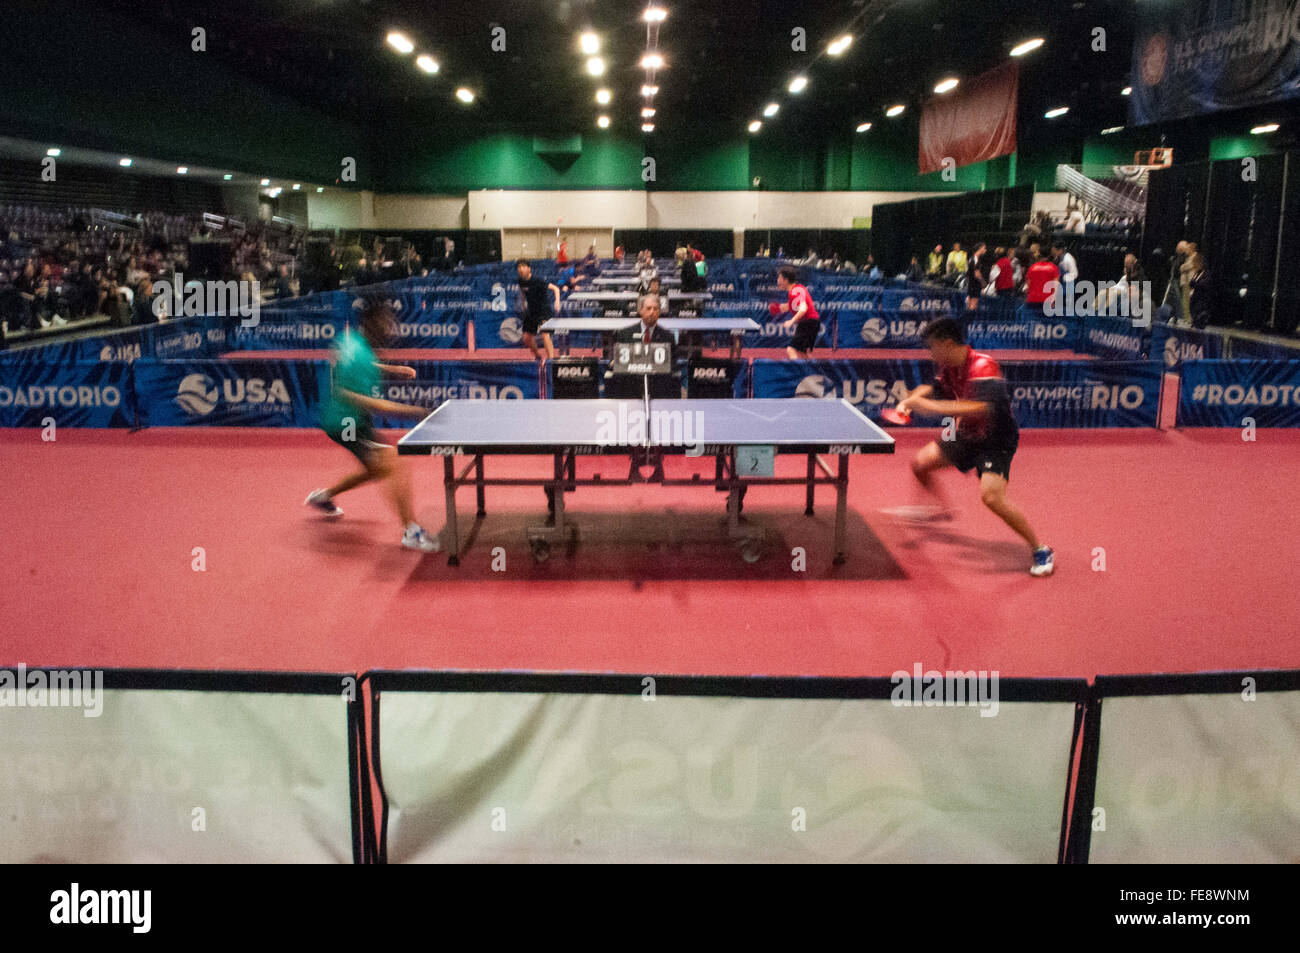 Greensboro, North Carolina, US. 4th Feb, 2016. Feb. 4, 2016 - Greensboro, N.C., USA - Nine qualifying tables in action at the 2016 U.S. Olympic Table Tennis Trials. The top three men and women from the trials move on to compete in April at the 2016 North America Olympic Qualification tournament in Ontario, Canada. The 2016 Summer Olympics will be held in Rio De Janeiro, Brazil, Aug. 5-21. © Timothy L. Hale/ZUMA Wire/Alamy Live News Stock Photo